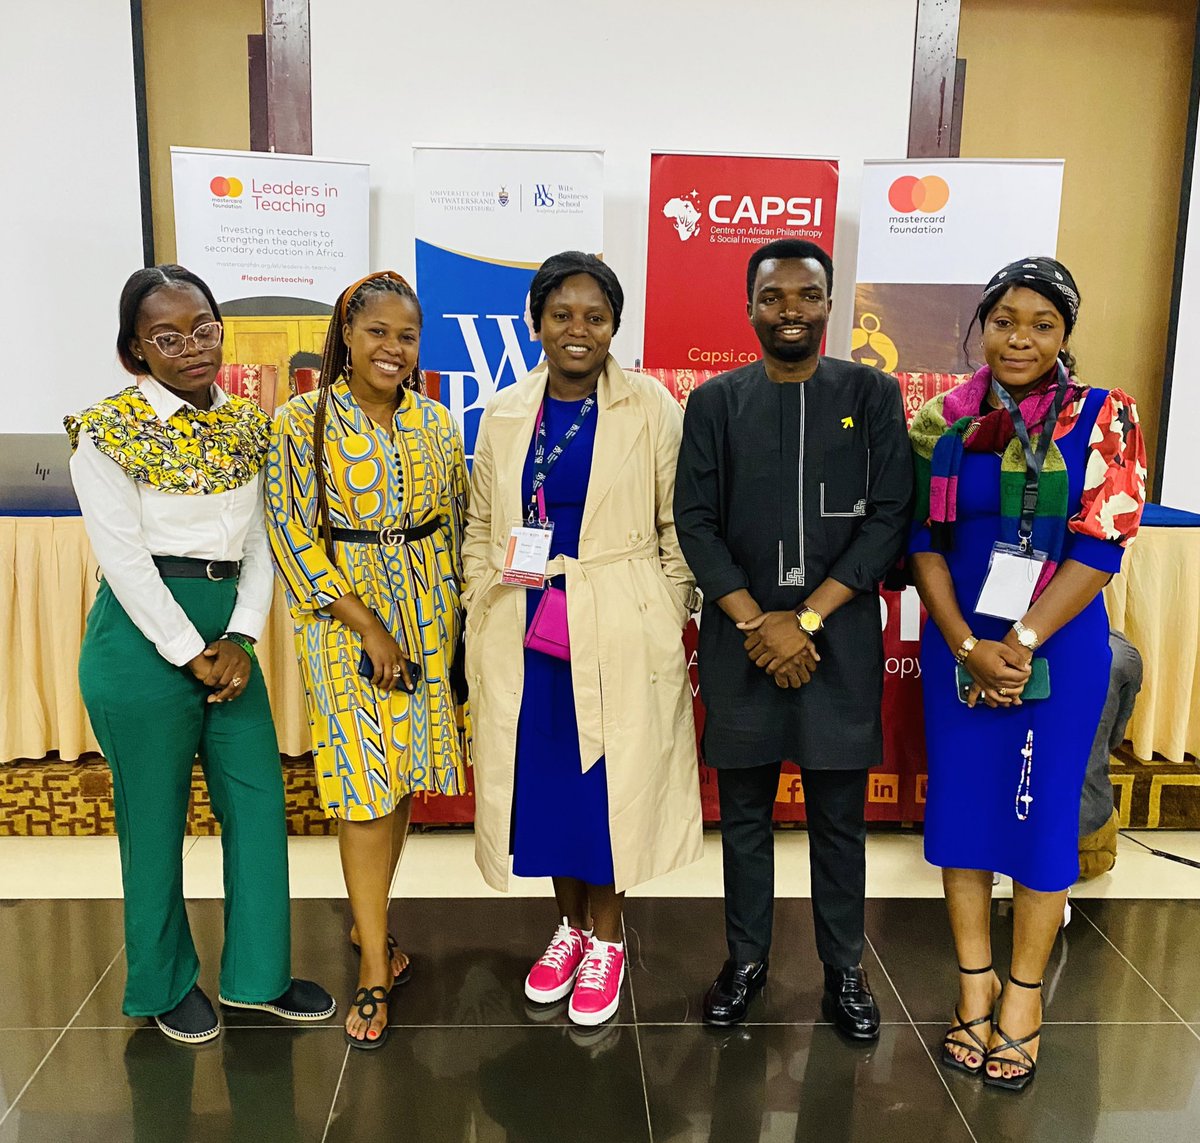 With @IpasRDC support we represented @YouthSprint 🇨🇩 at #YouthConvening. Bringing together young people from different African countries under the @capsi_africa & @MastercardFdn project that seeks understand the role of the sector in creating dignified and fulfilling employment.